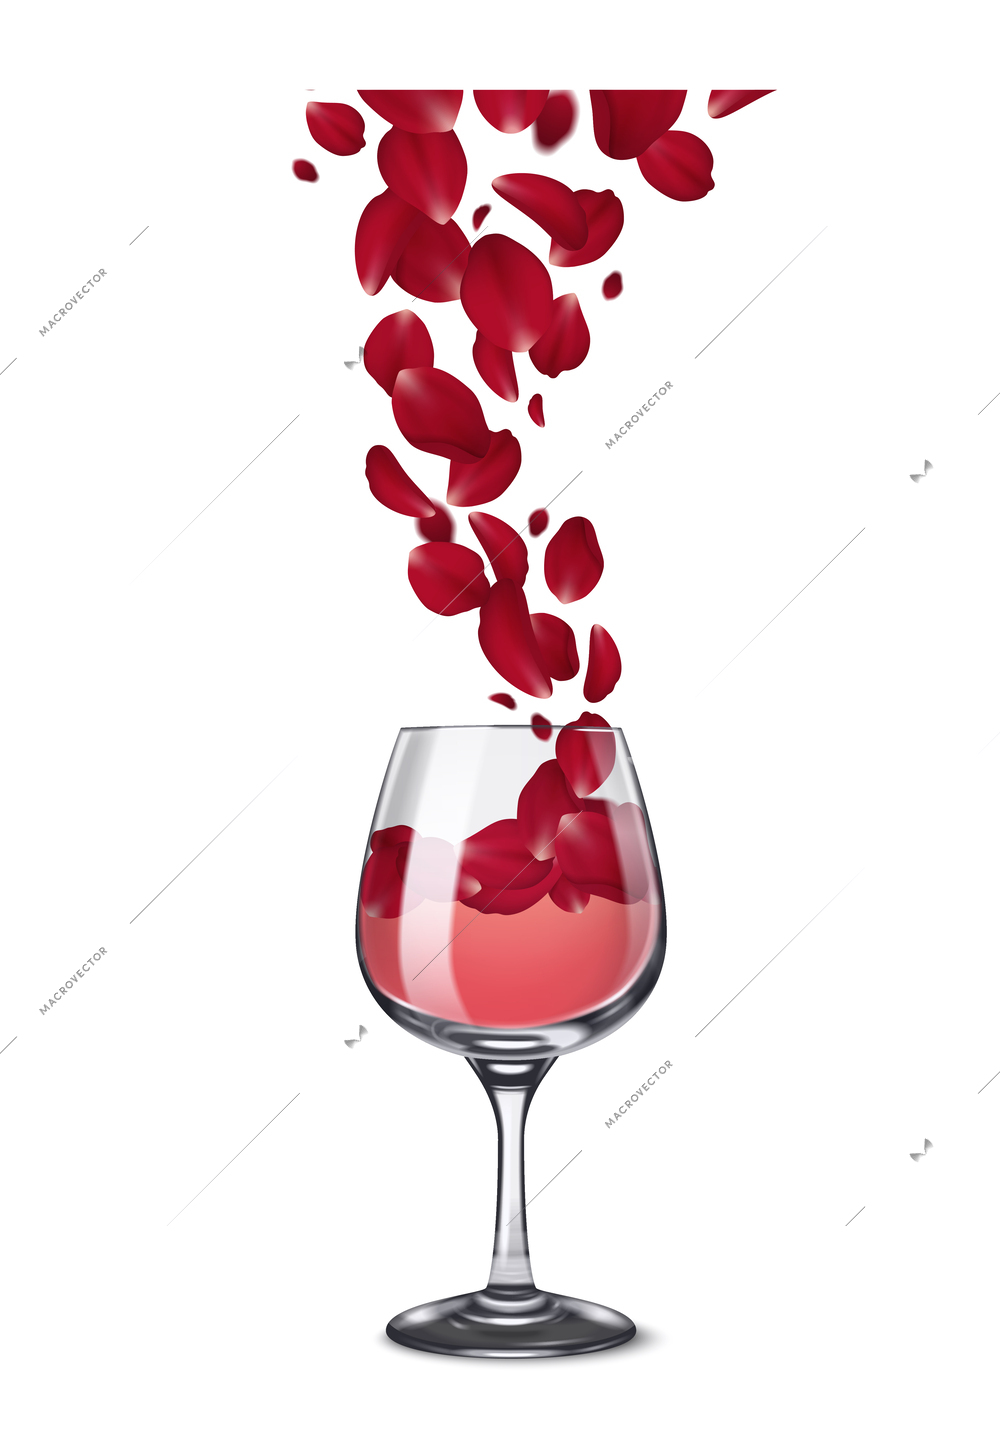 Glassware wine glass realistic rose petals composition with front view of falling leaves on blank background vector illustration